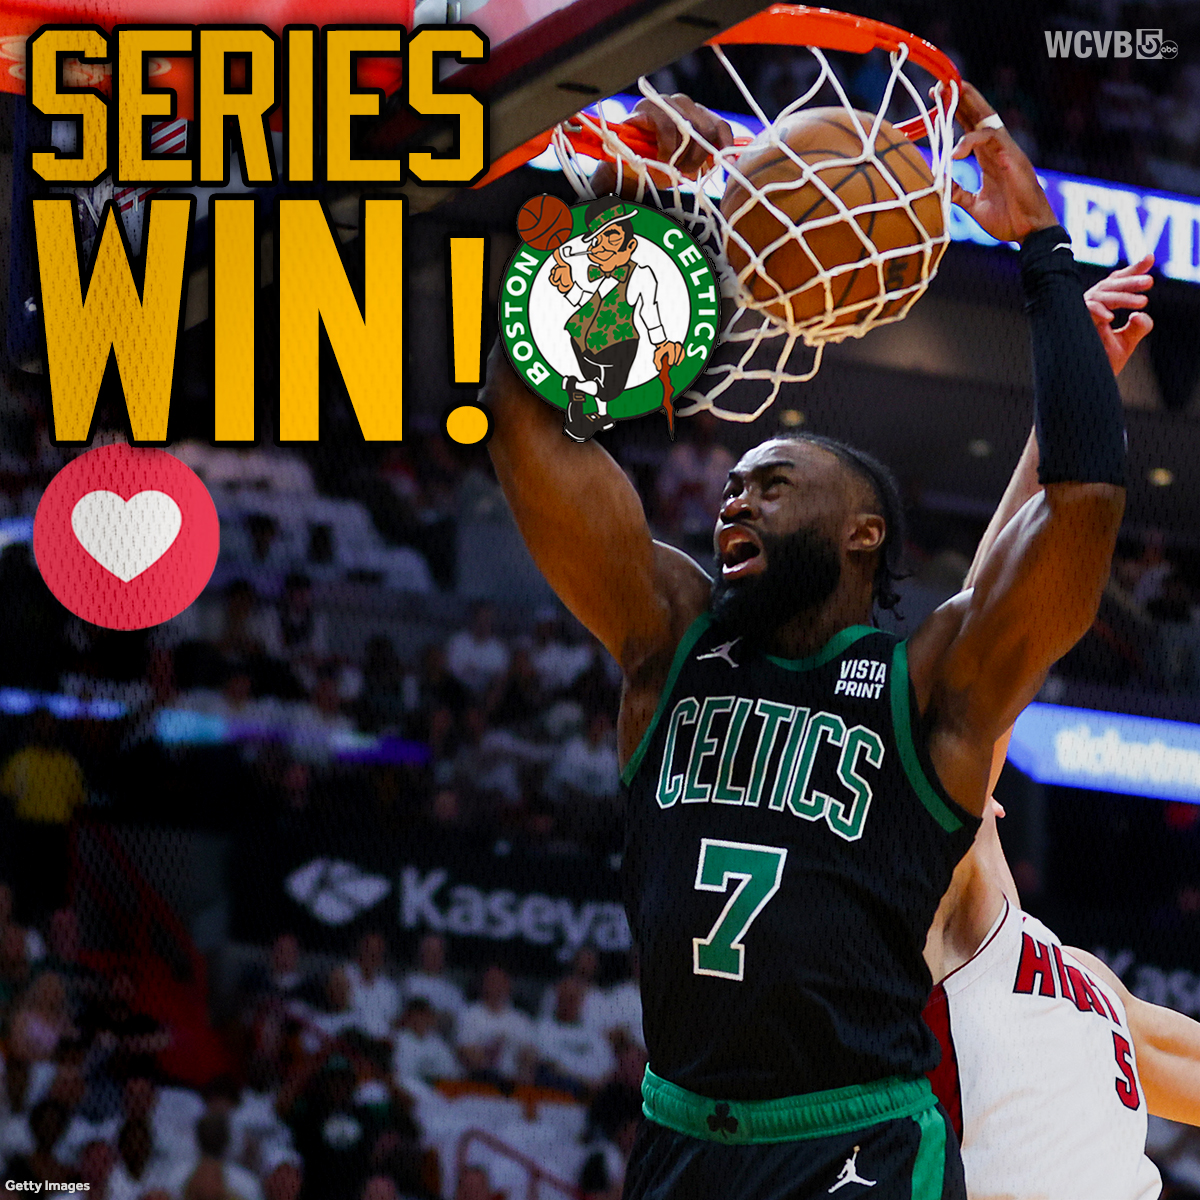 That was a fun ending!  #Celtics enjoy a blowout win to end their series against the Heat and now await their next opponent.  ❤️🏀❤️  How you feeling fans?